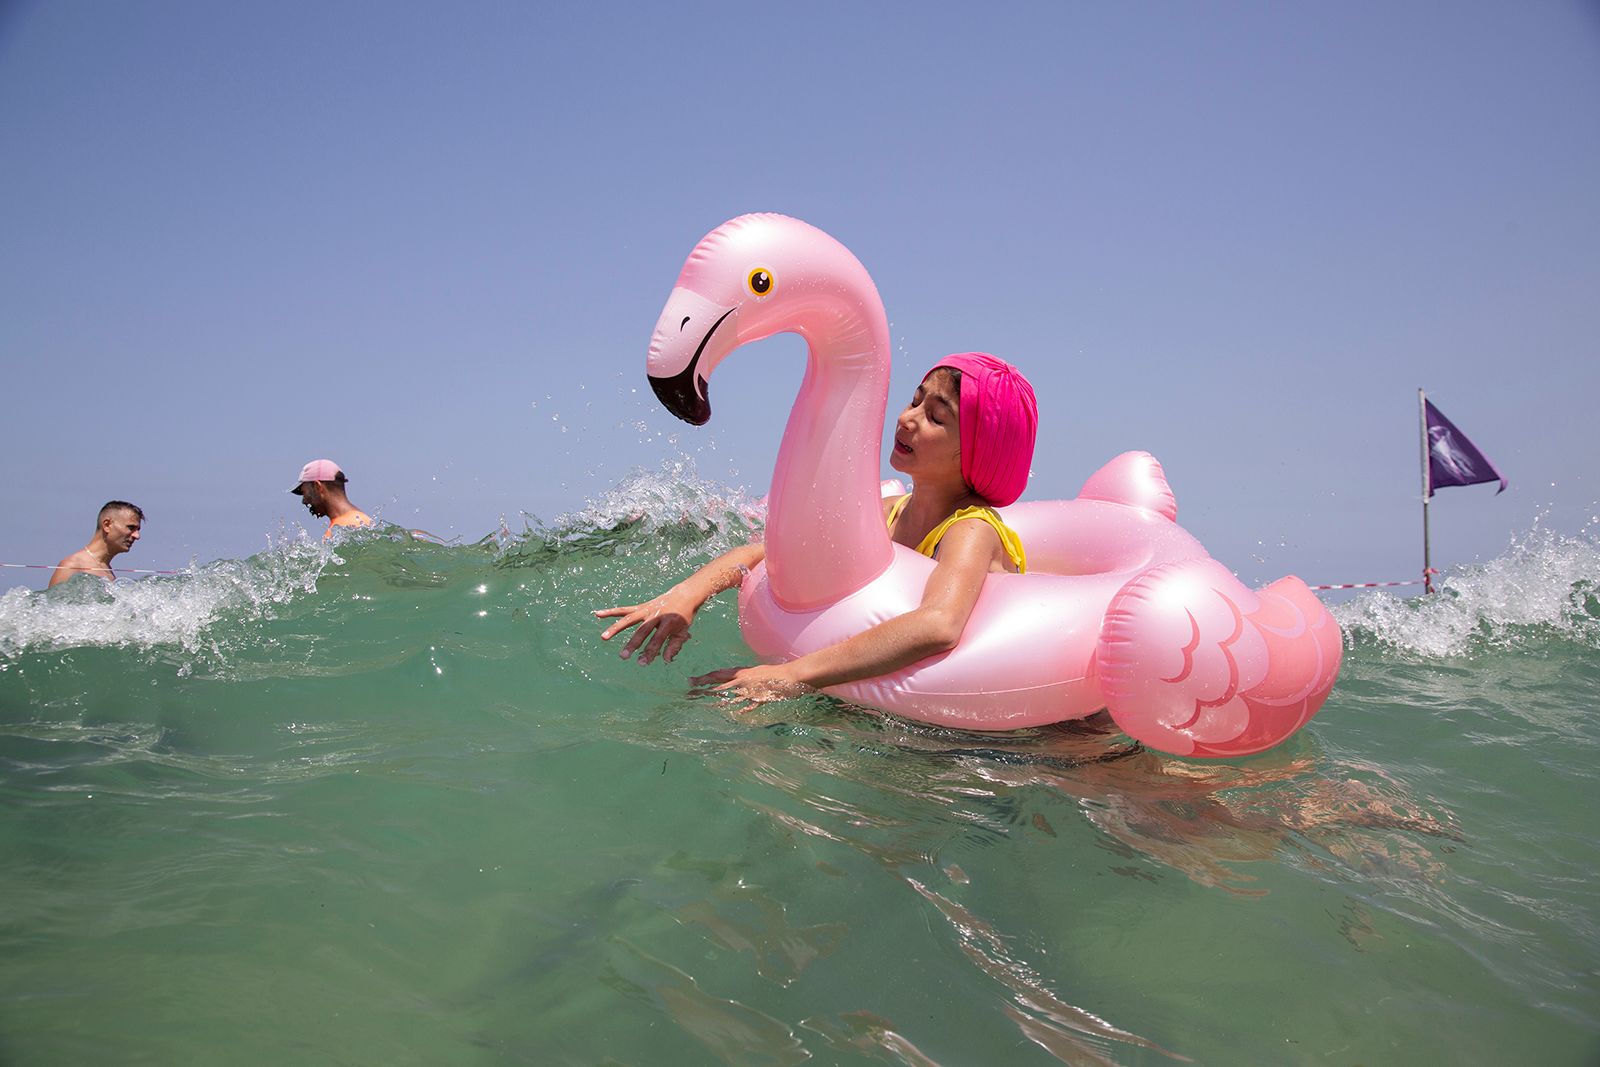 © Efrat Sela - Image from the A day at the beach photography project